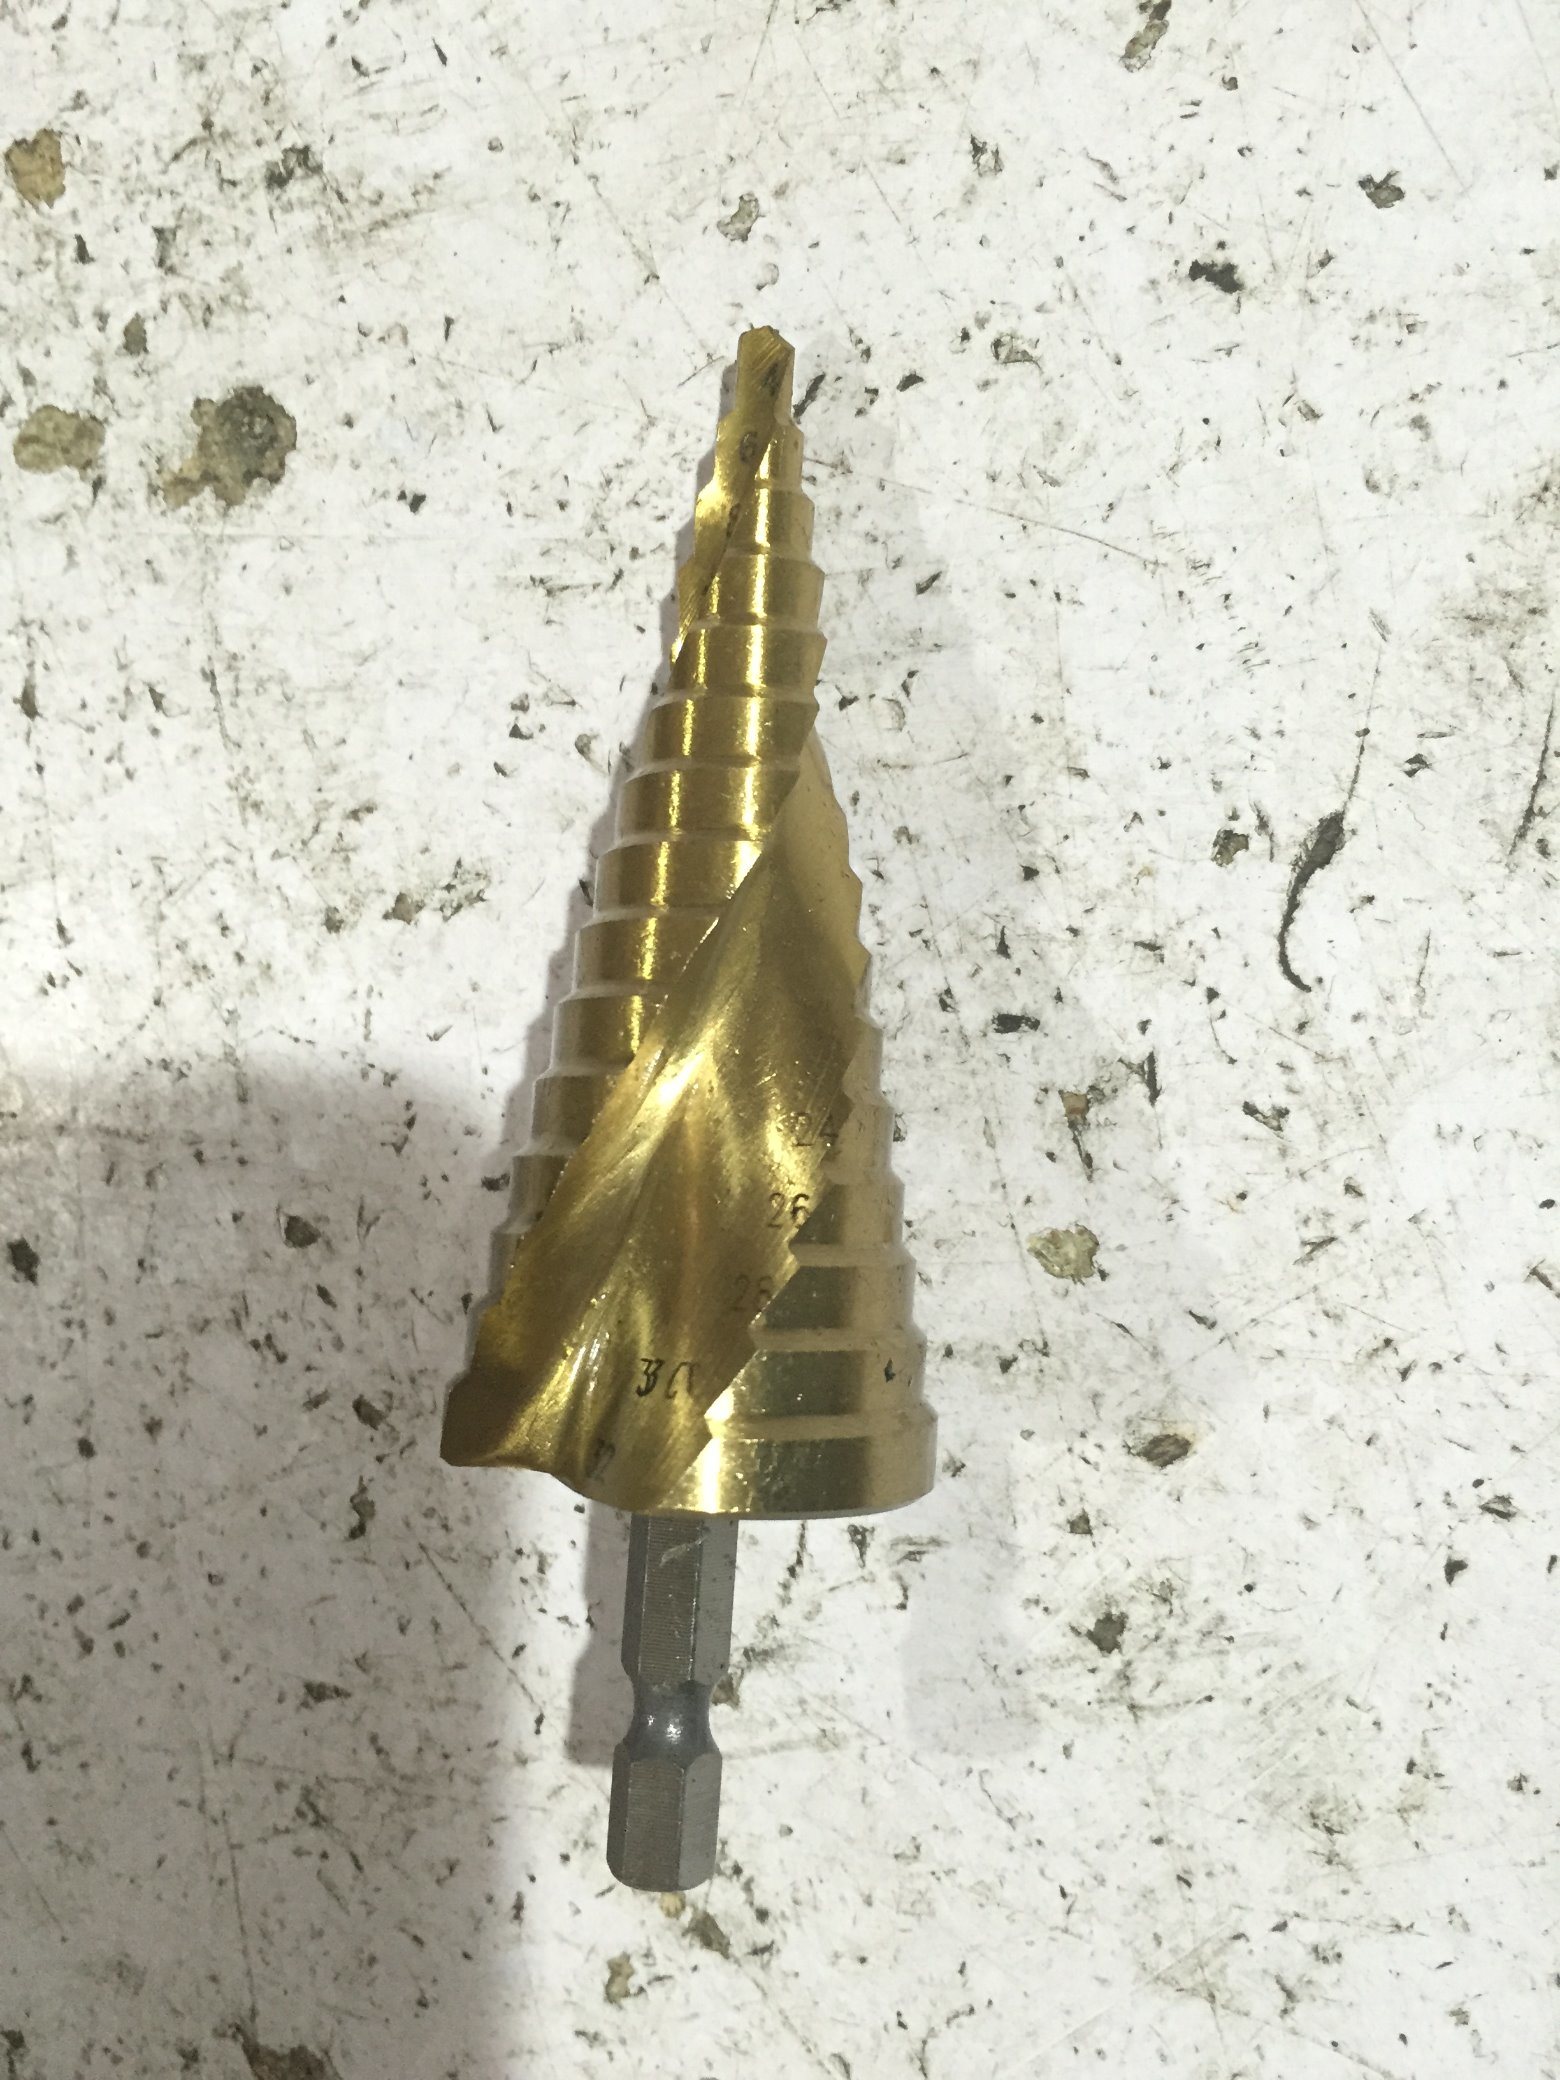 Tin-Coated HSS Step Drill Bits with Flat Surface (SED-SDFT)